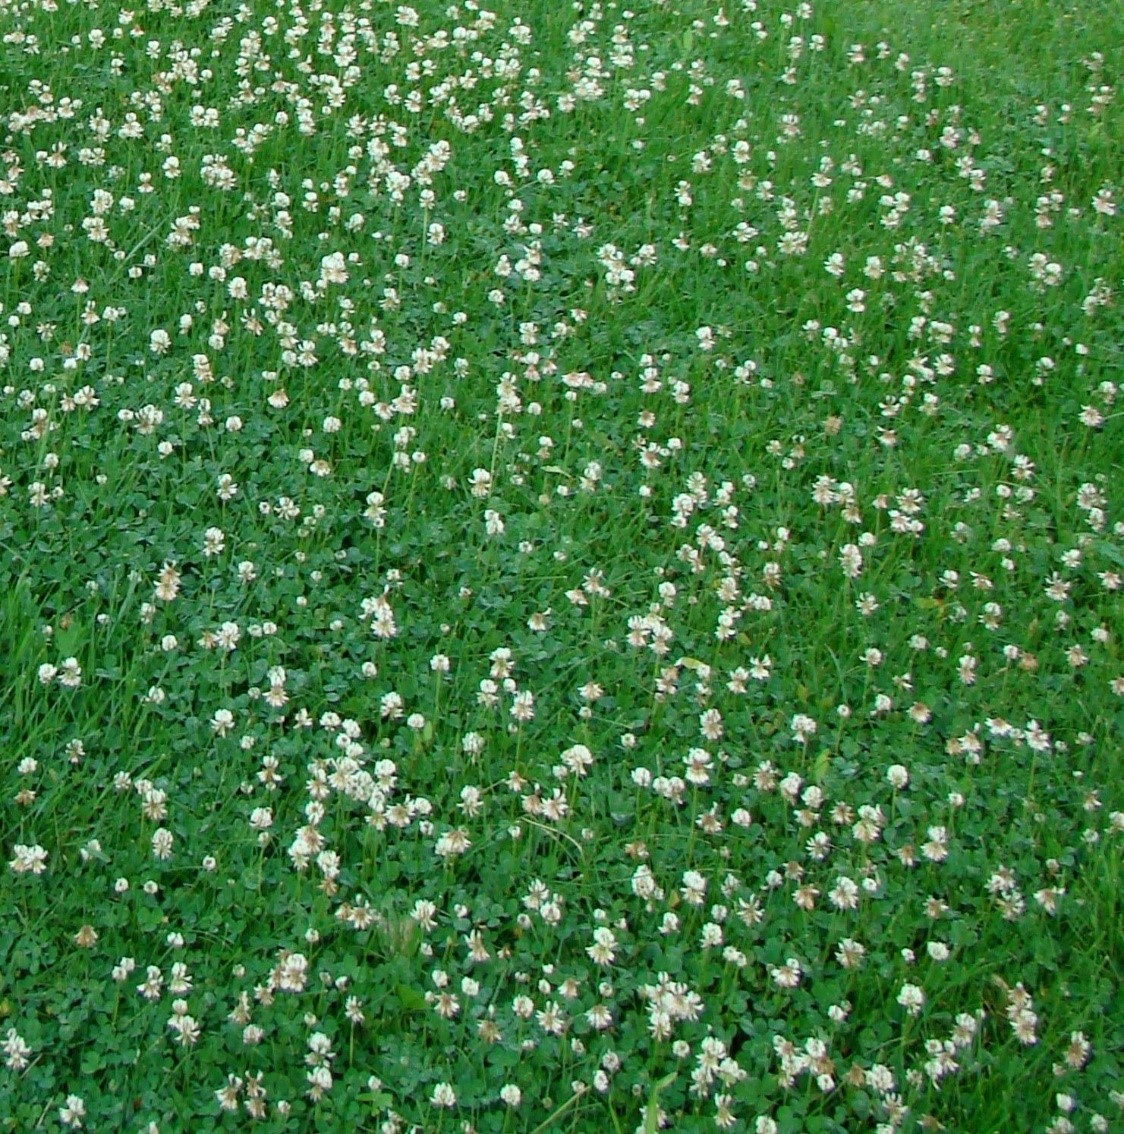 How To Control White Clover In Lawns - LoveMyLawn.net